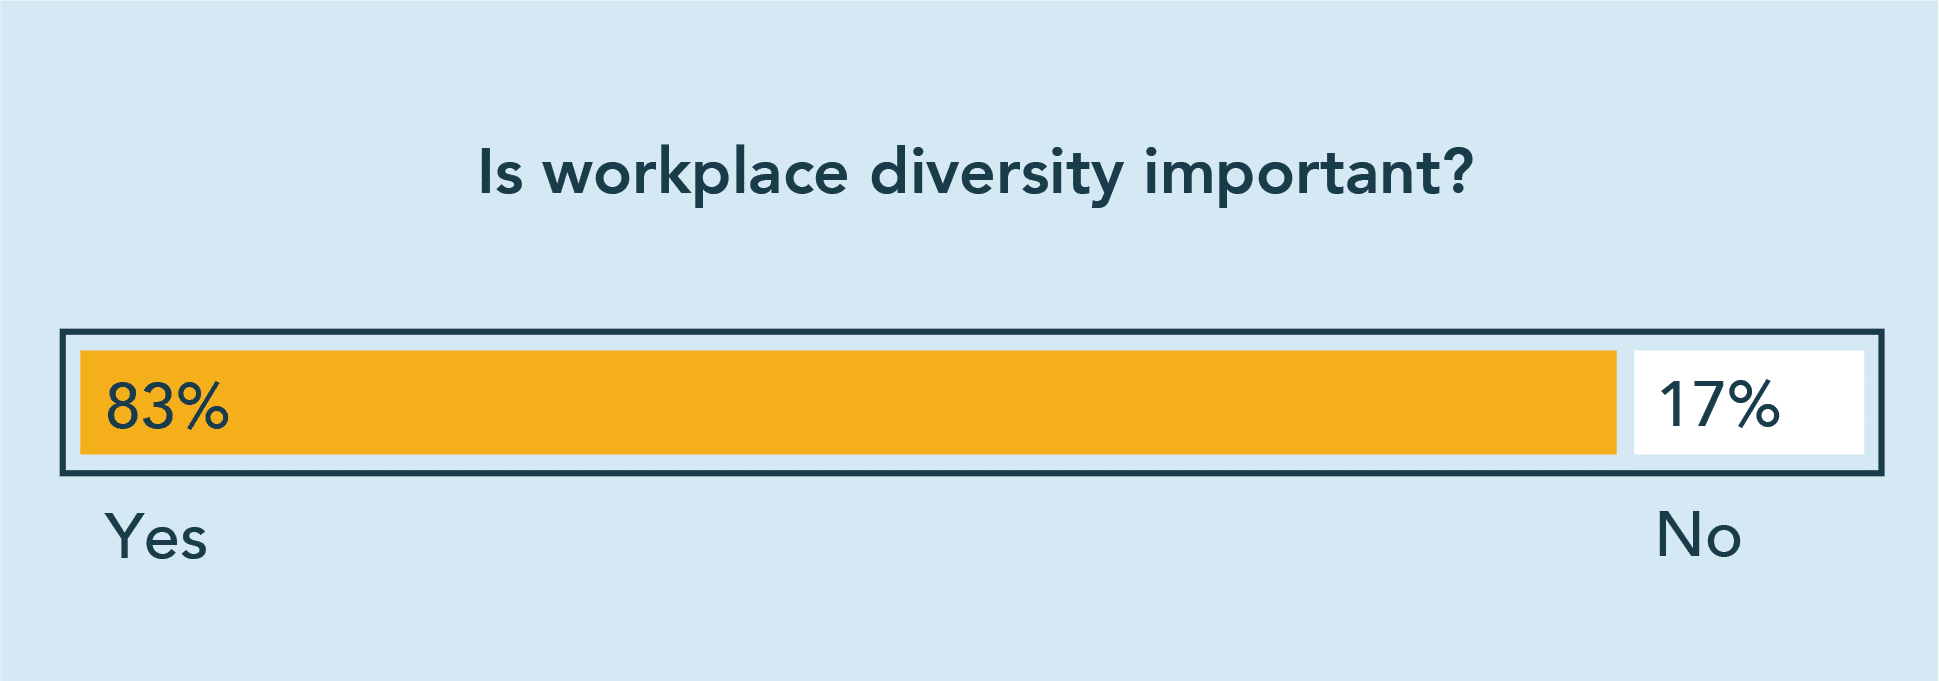 83% of people believe workplace diversity is important